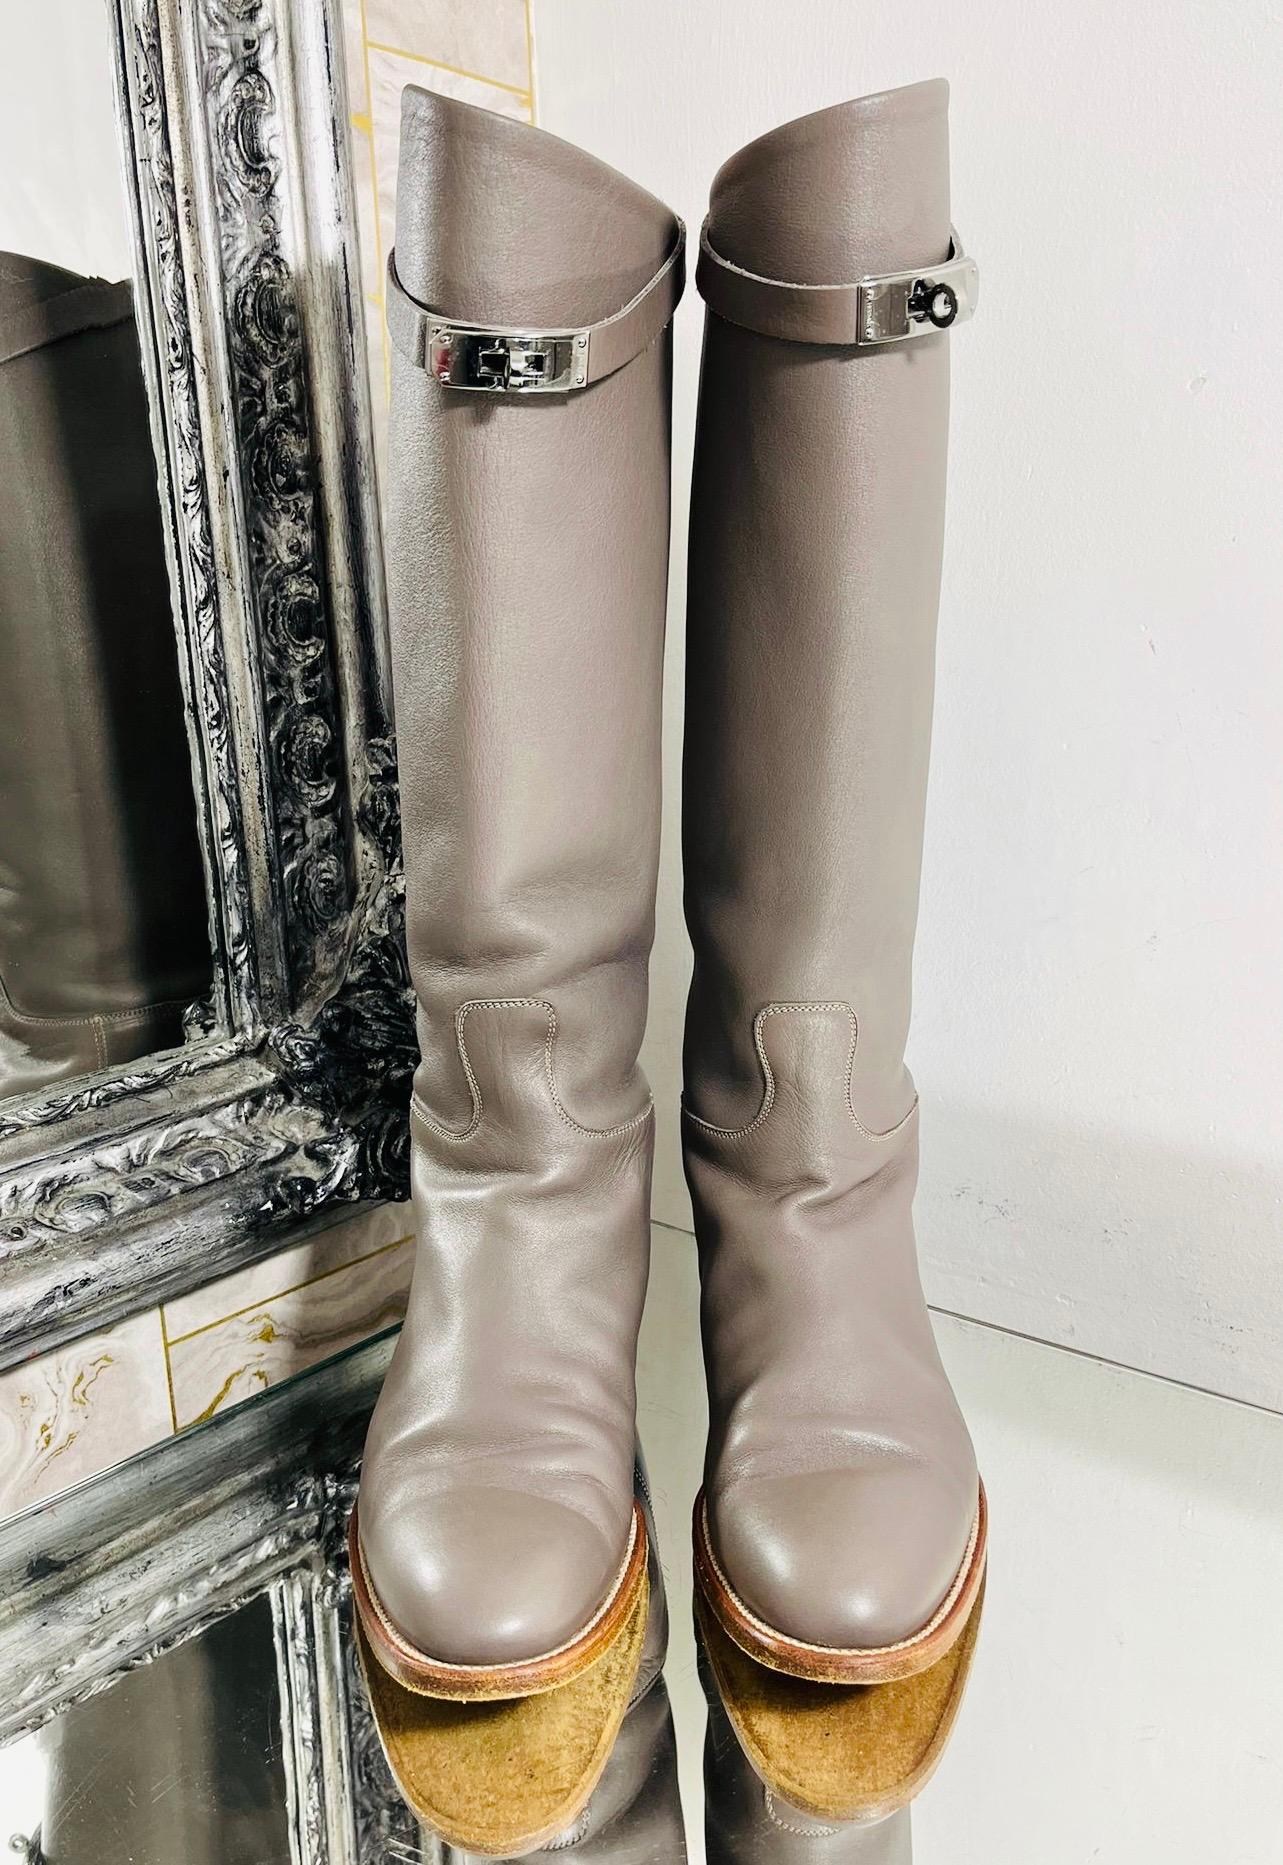 Hermes Leather Jumping Boots

Greige riding boots designed with palladium plated twist-lock buckle detail featuring 'Hermes' engravement.

Styled with almond toe, slip-on fit and leather soles, heel and lining. Rrp £2270

Size – 40

Condition – Very